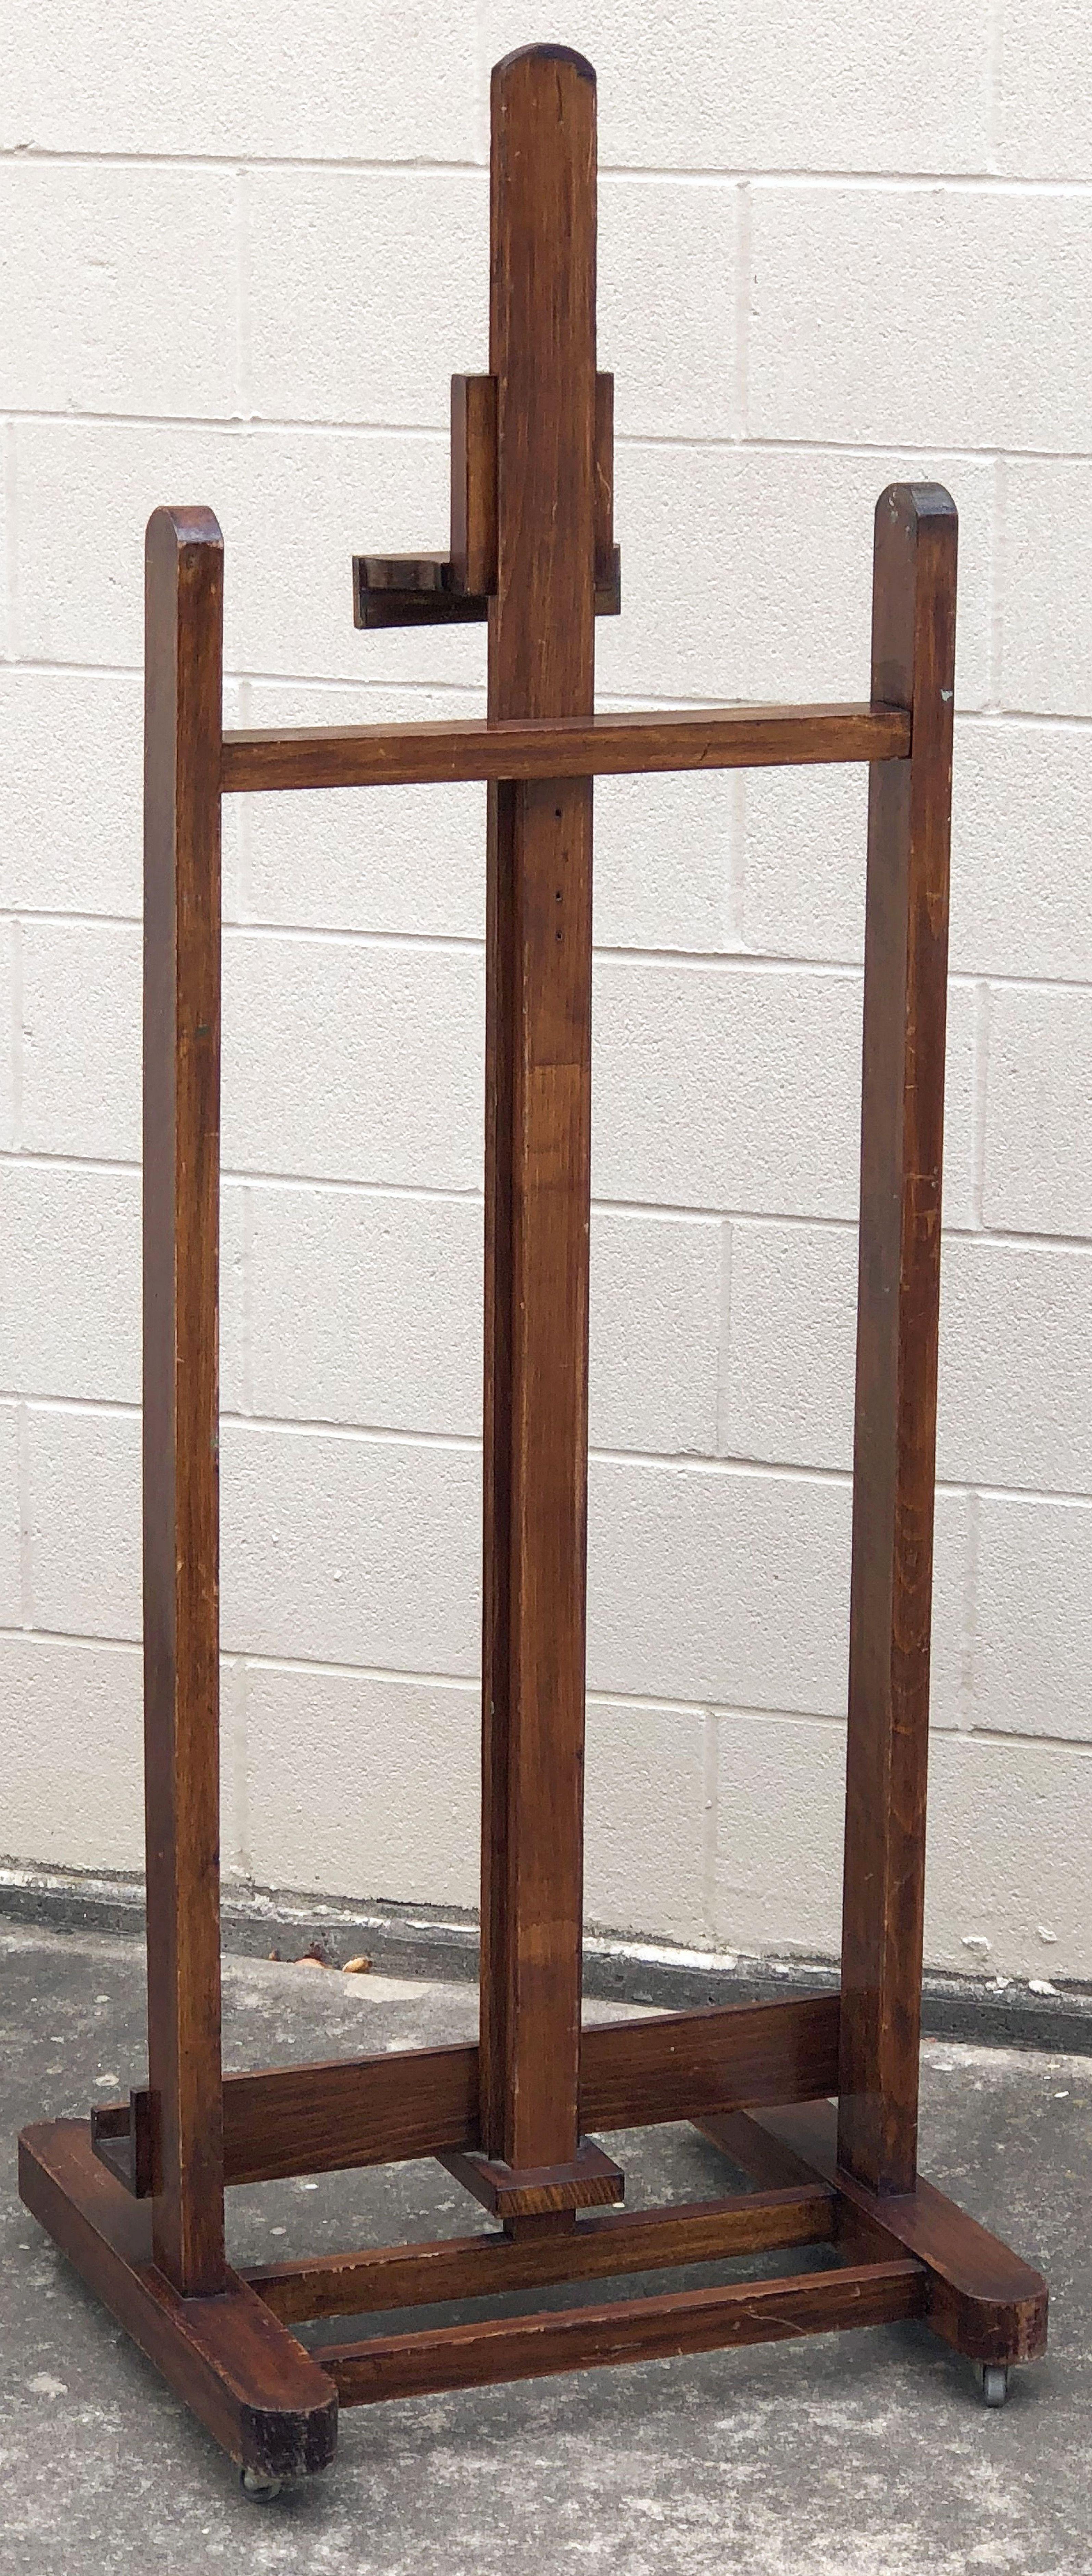 Large English Artist's Display or Floor Easel with Adjustable Tray 8